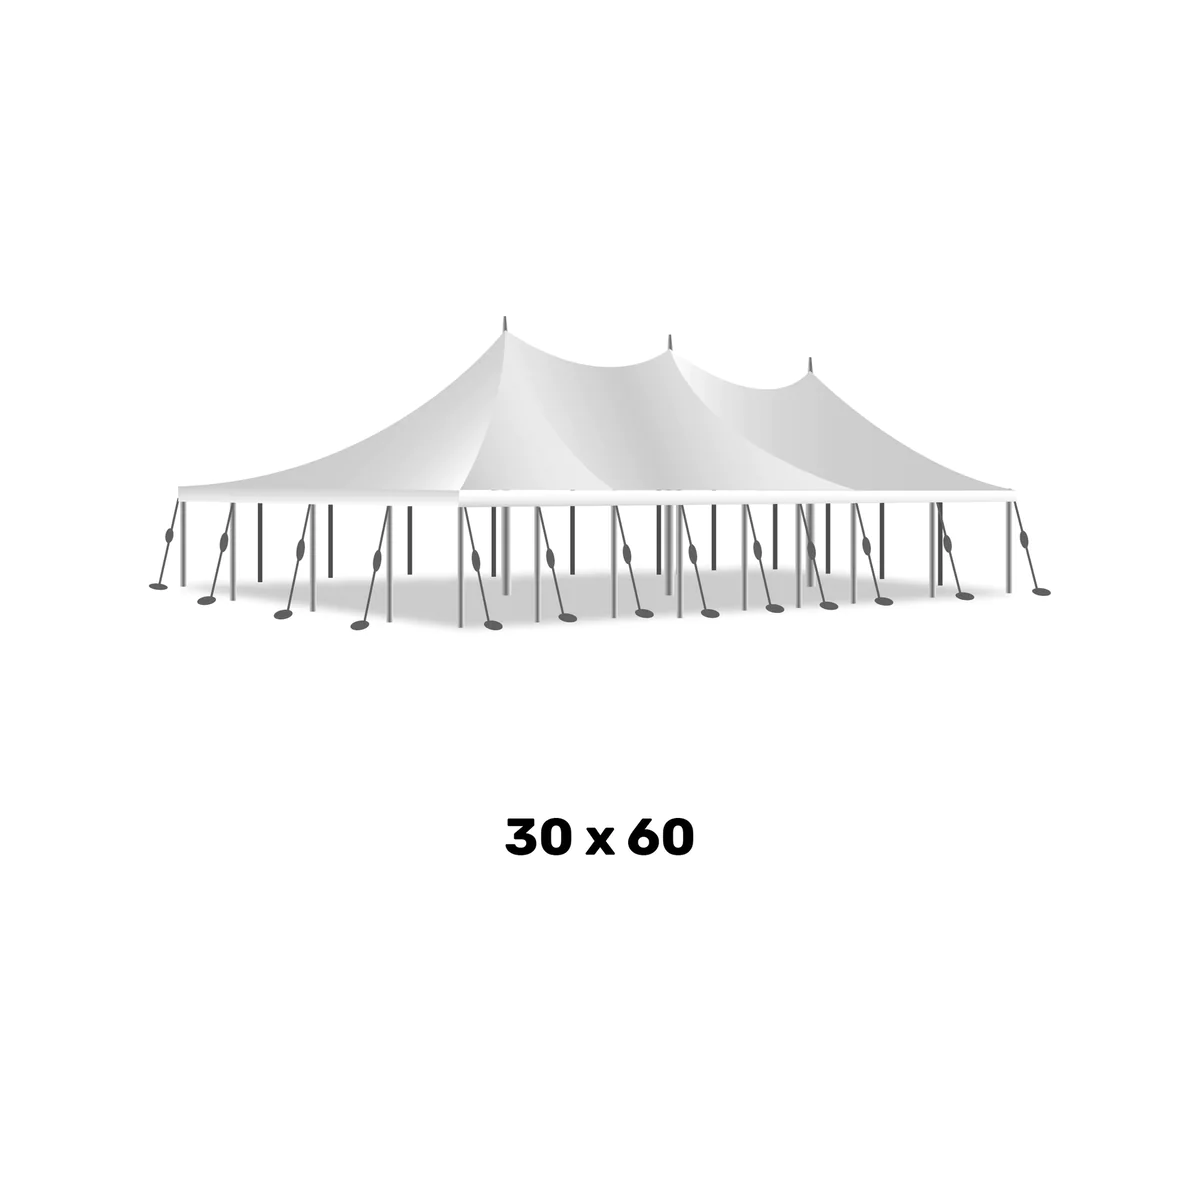 a 30 foot by 60 foot white marquee high peak pole tent